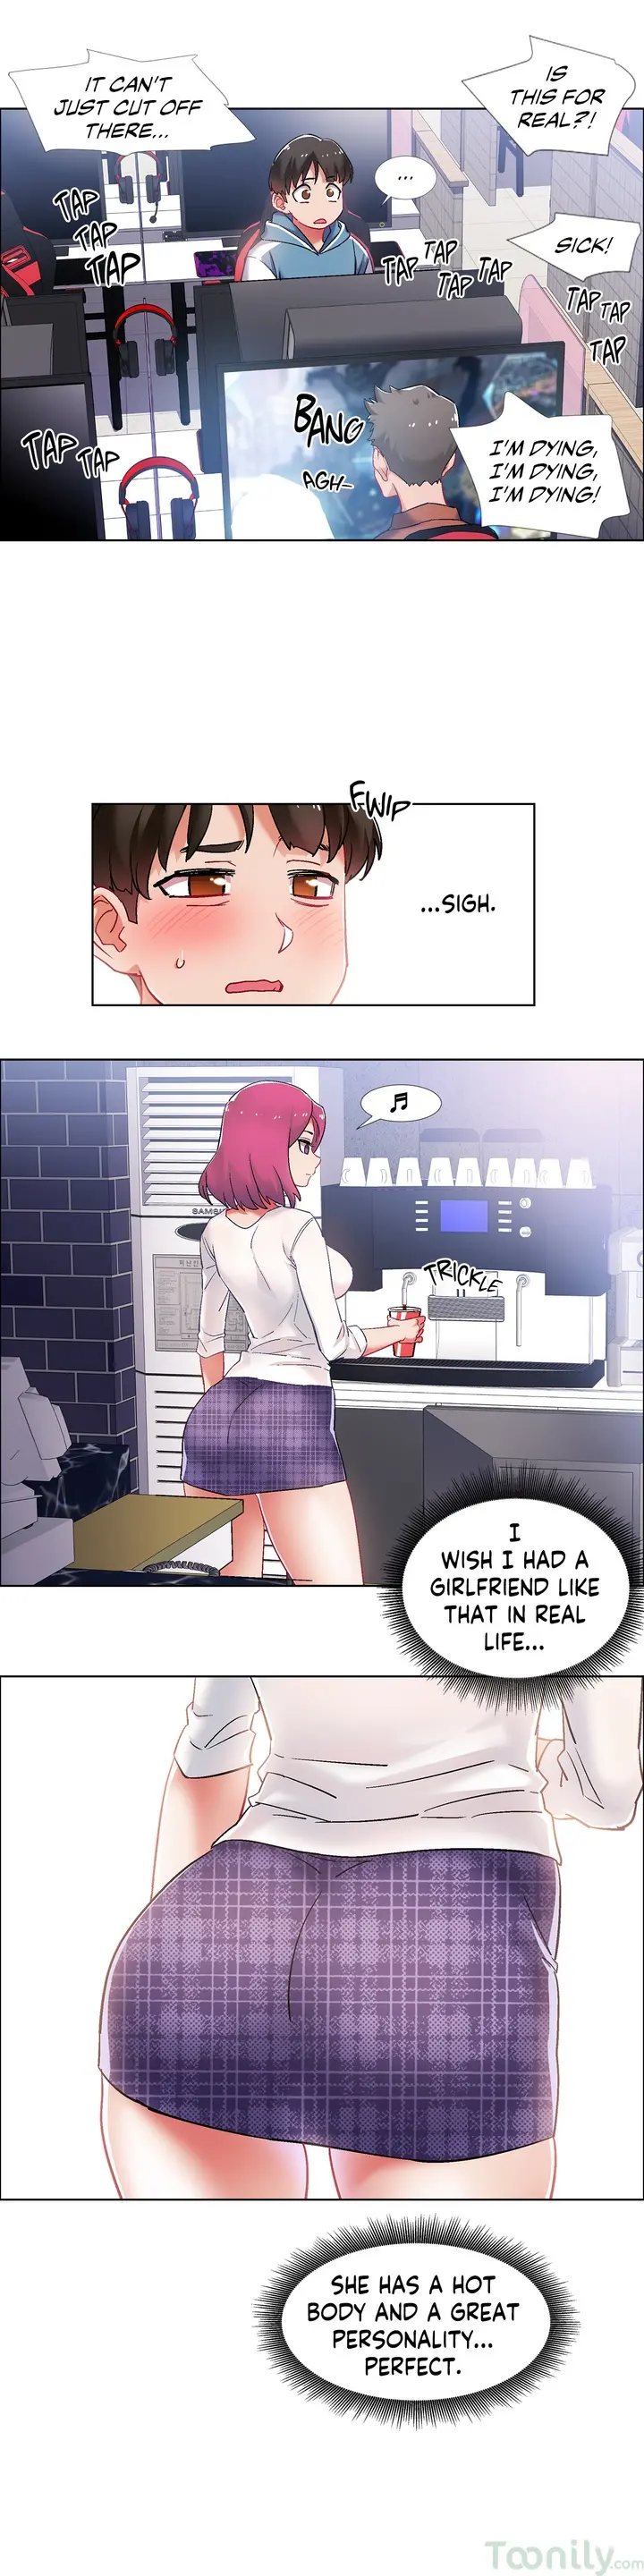 Rental Girls Chapter 34 - Page 7